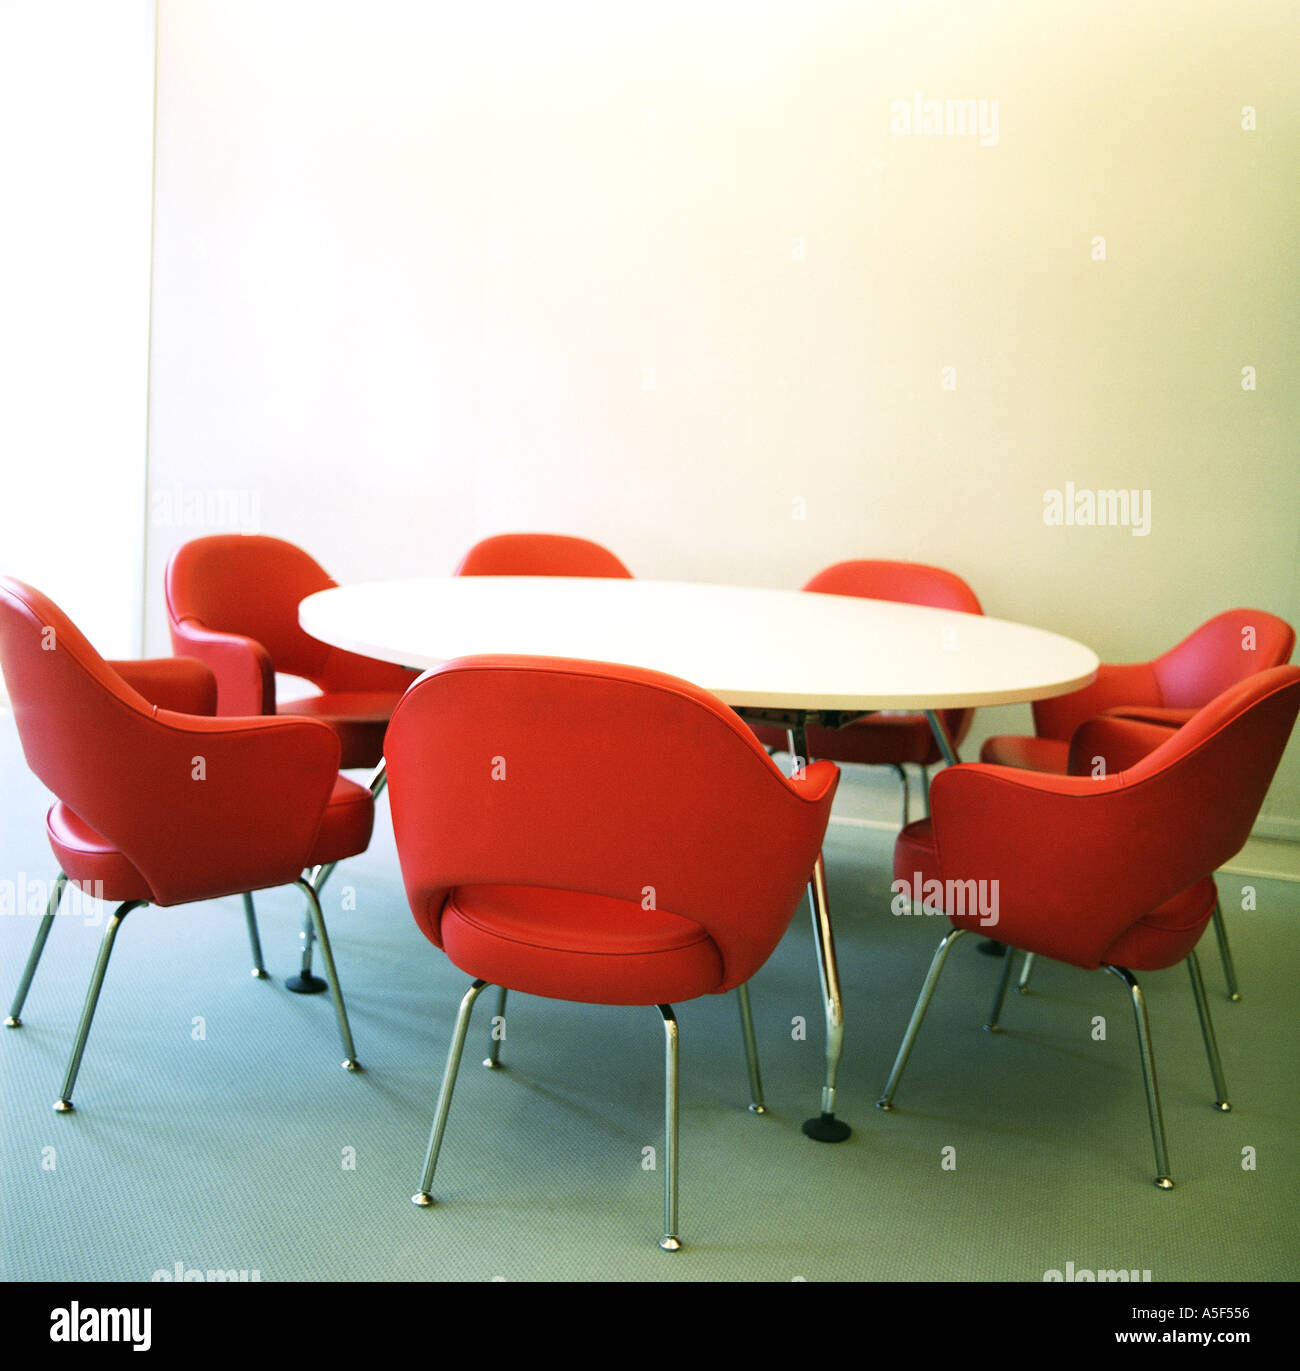 Red Office Chairs Around A Round Table A5F556 